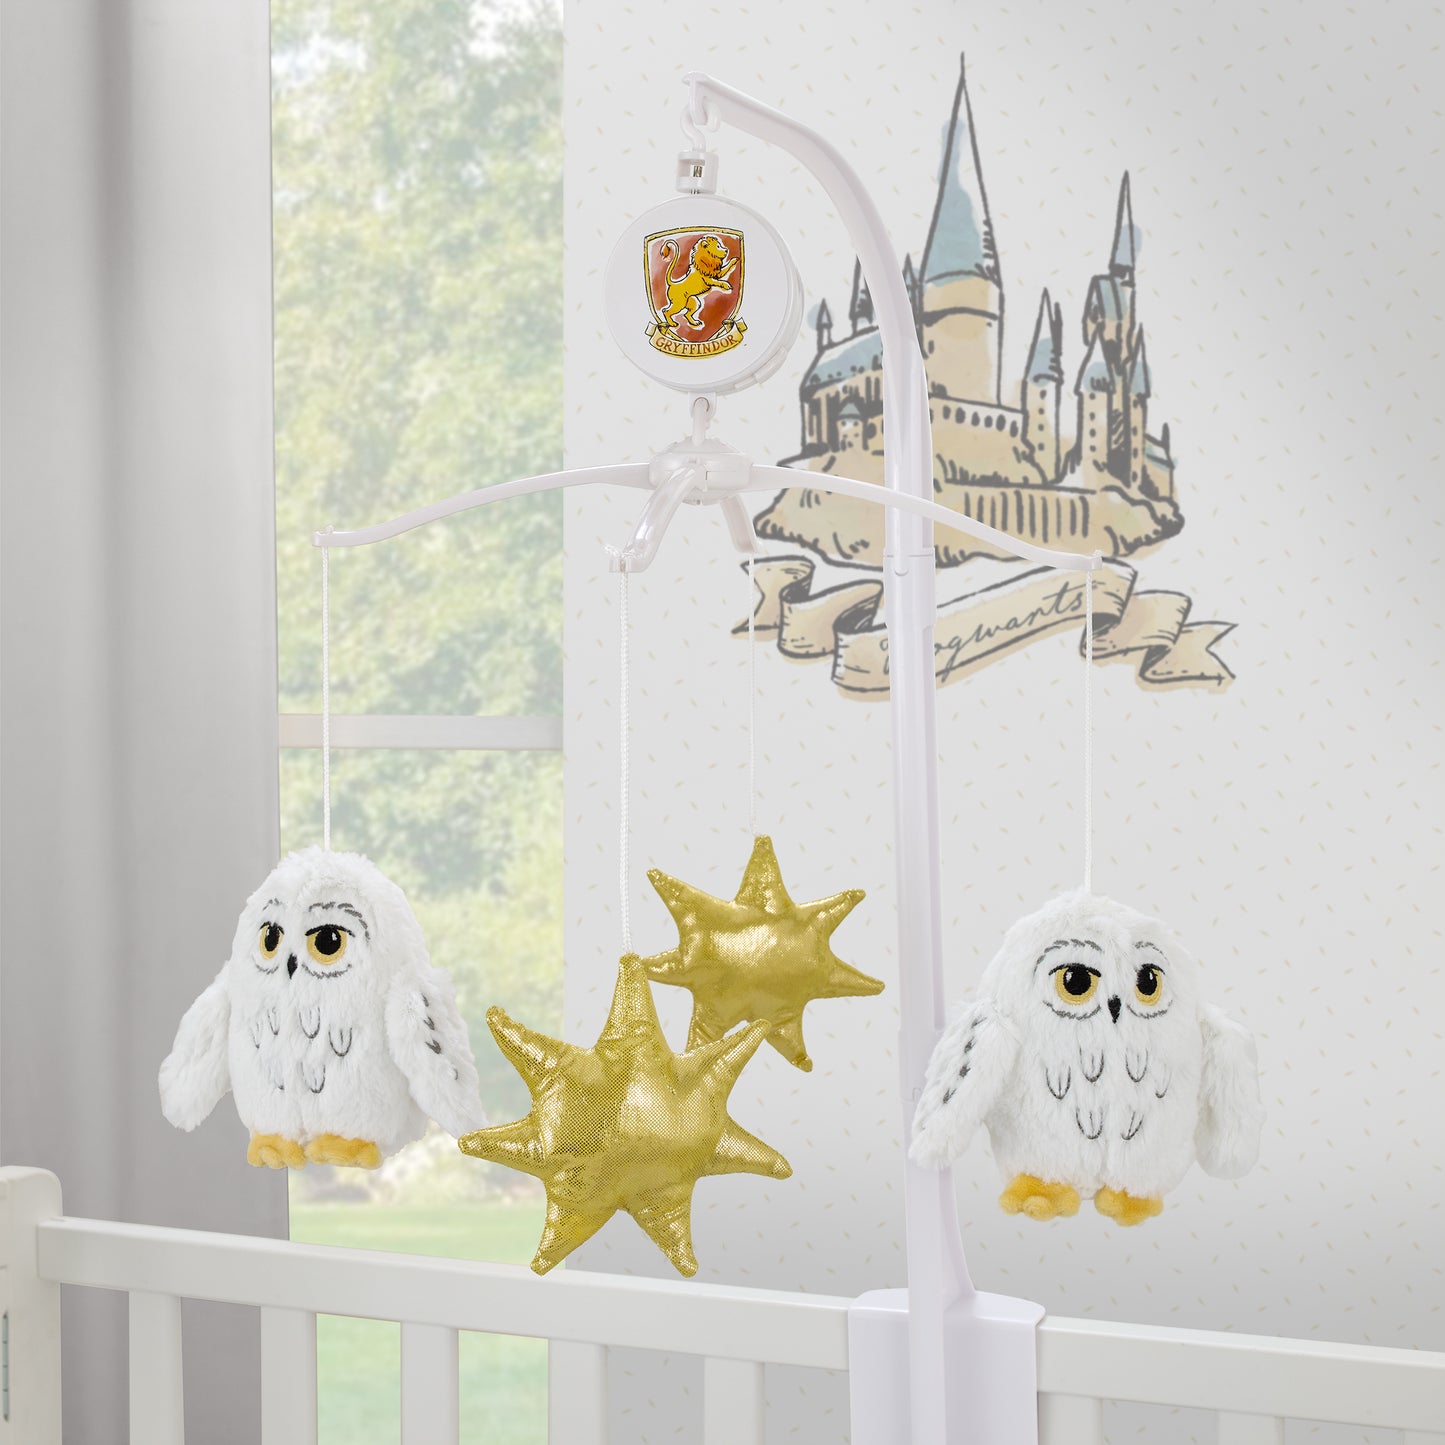 Warner Brothers Harry Potter Magical Moments White and Gold Hedwig Musical Mobile